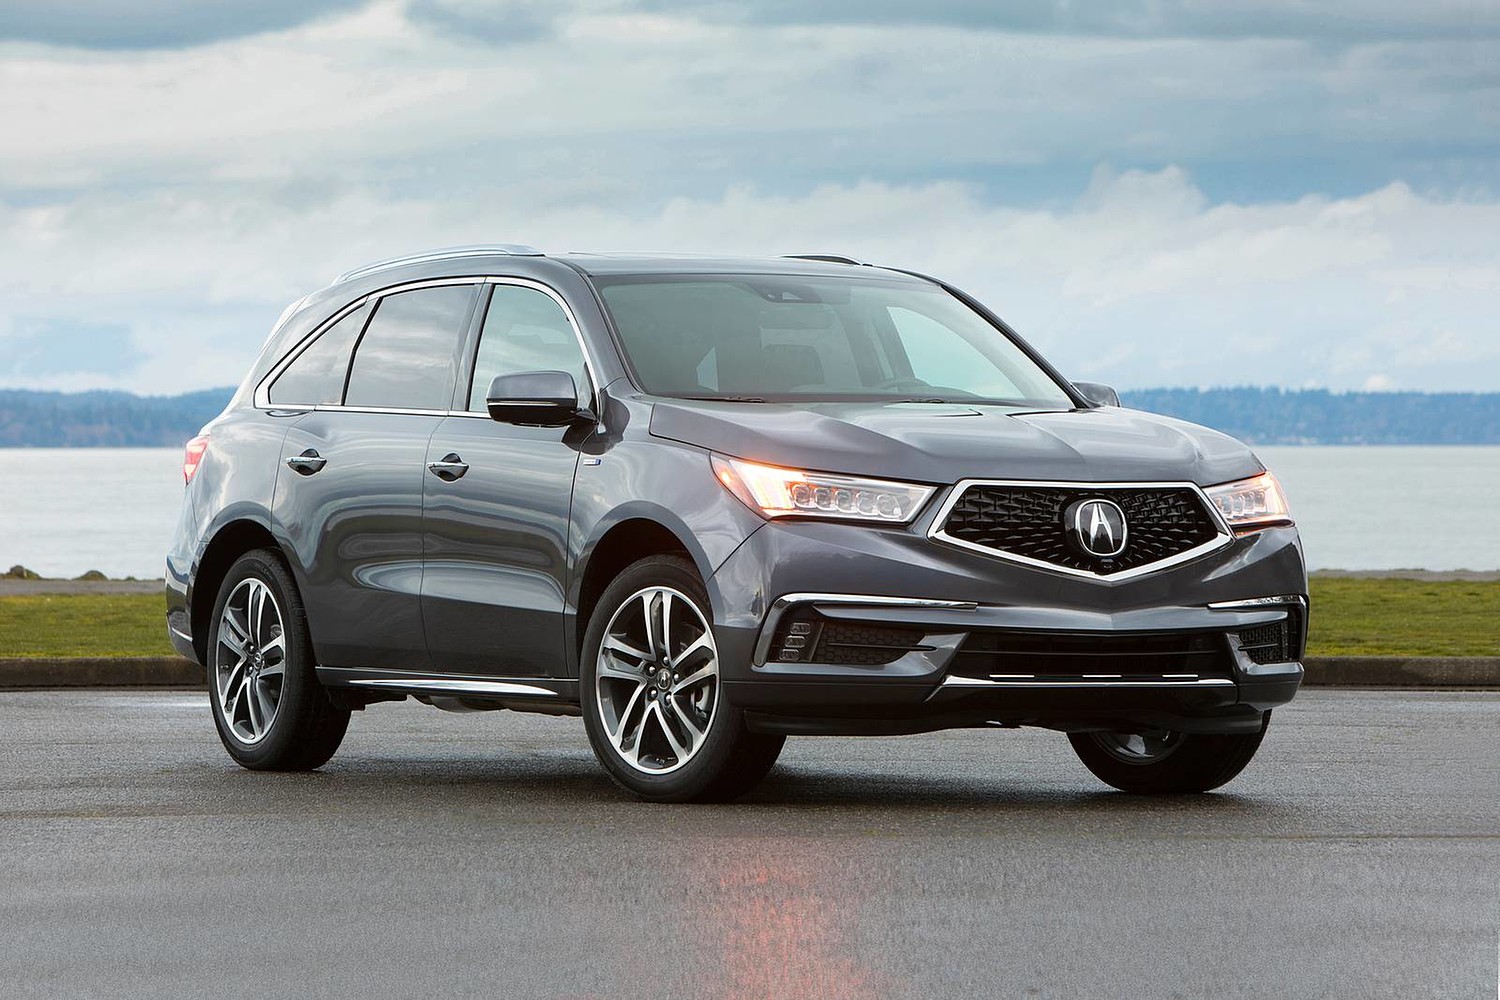 2018 Acura MDX Sport Hybrid SH-AWD w/Advance Package 4dr SUV Exterior Shown